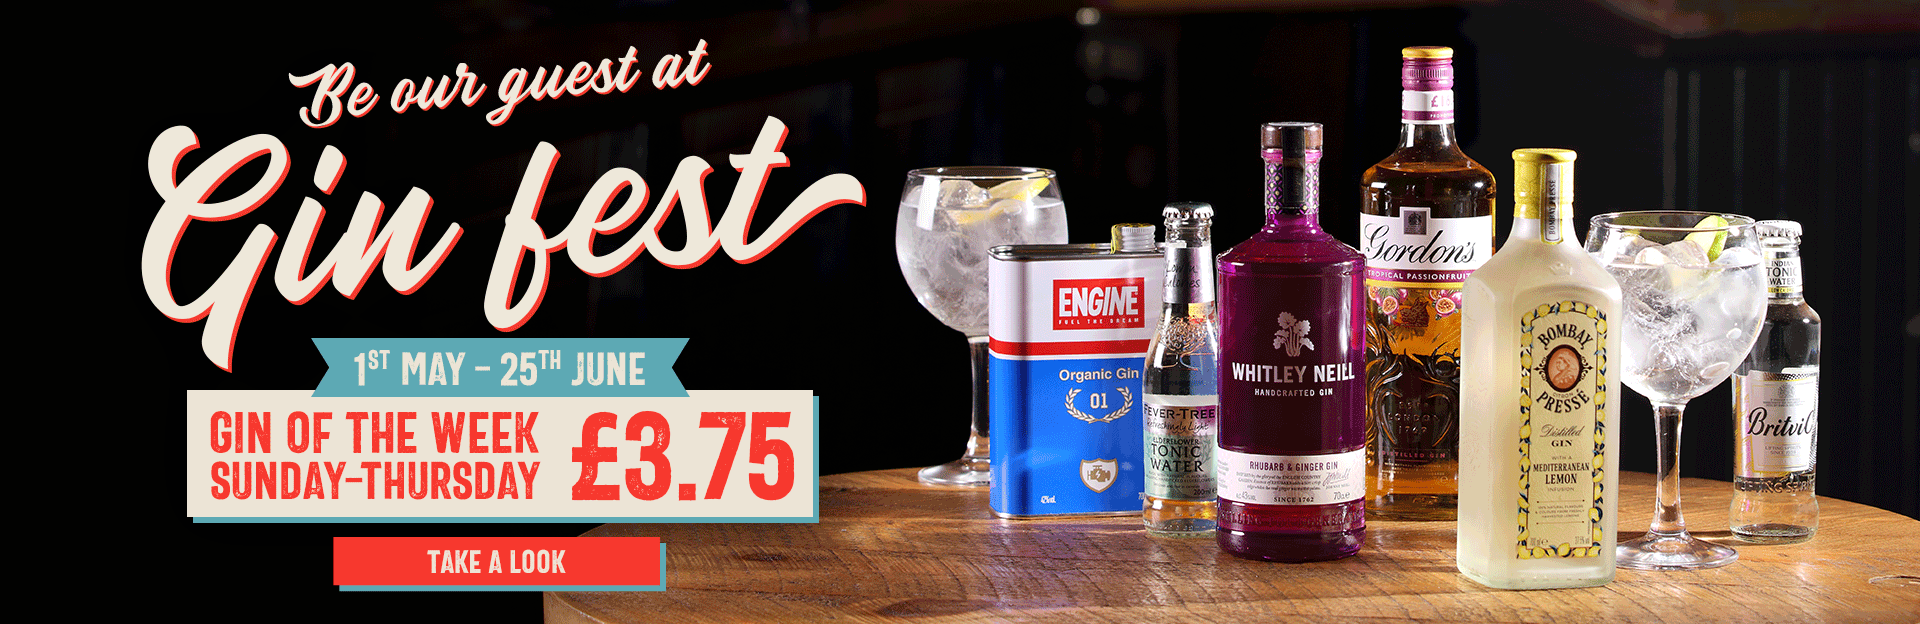 Gin Fest at The Three Crowns